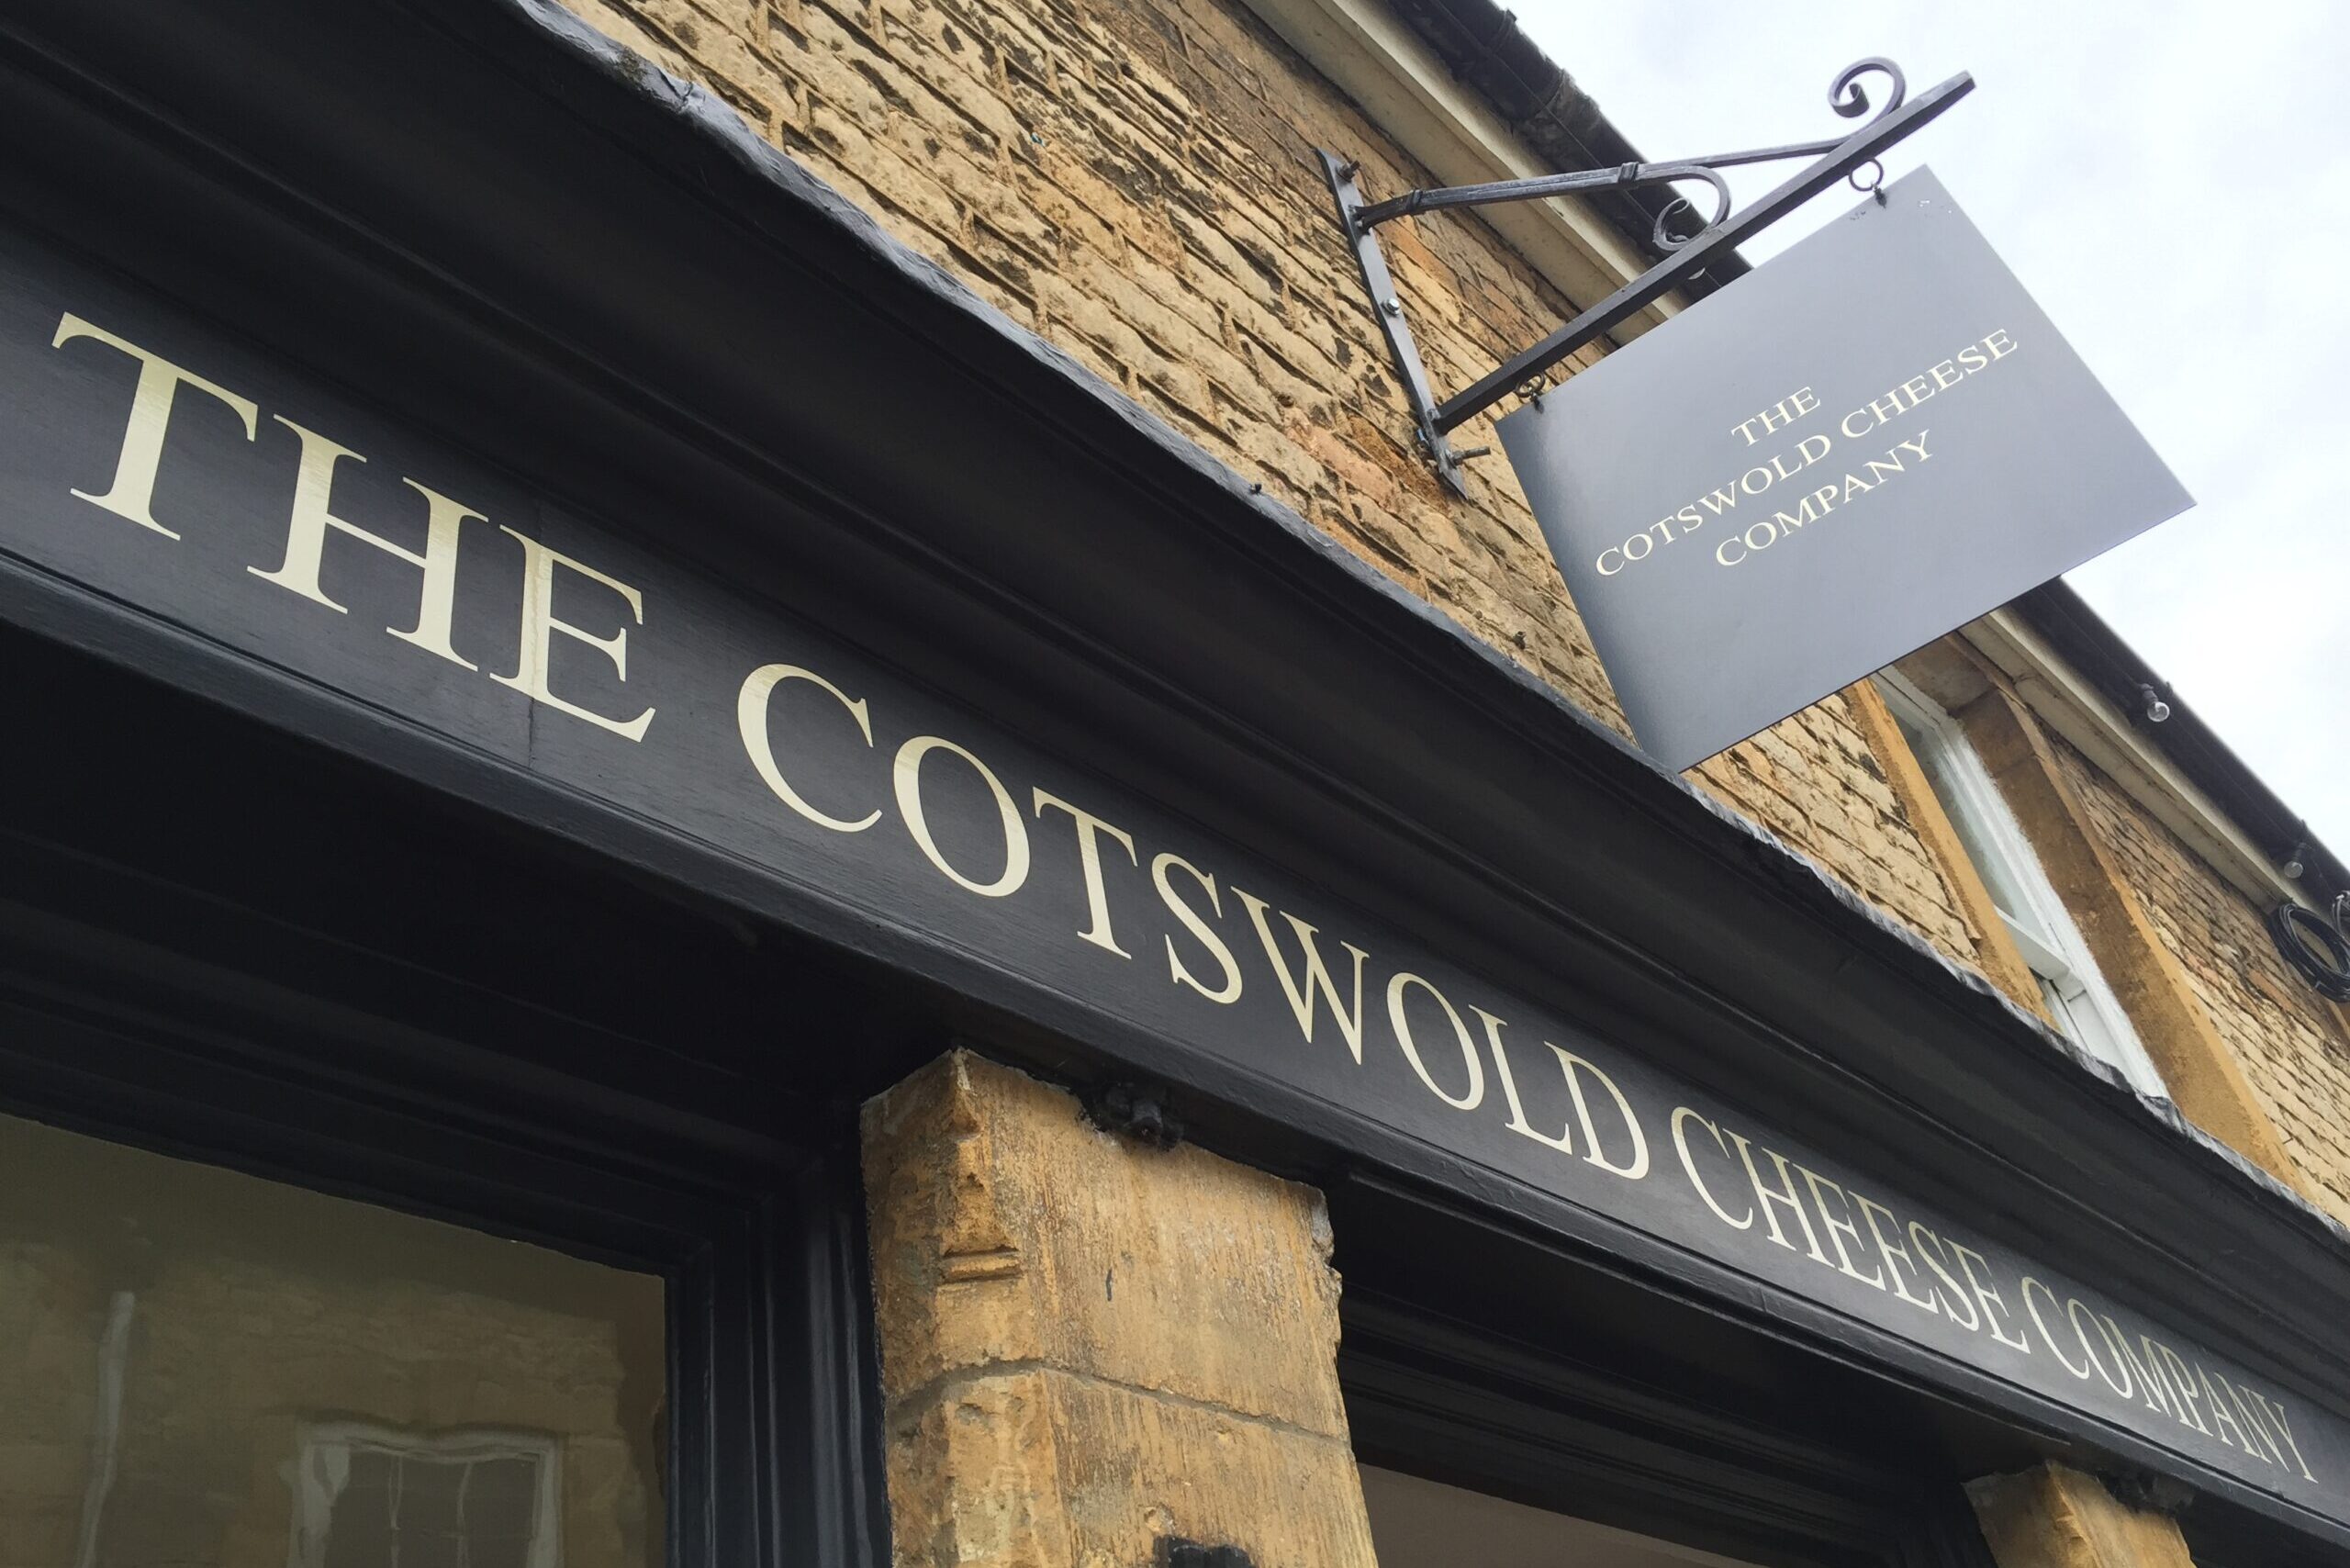 Cotswold Cheese Company